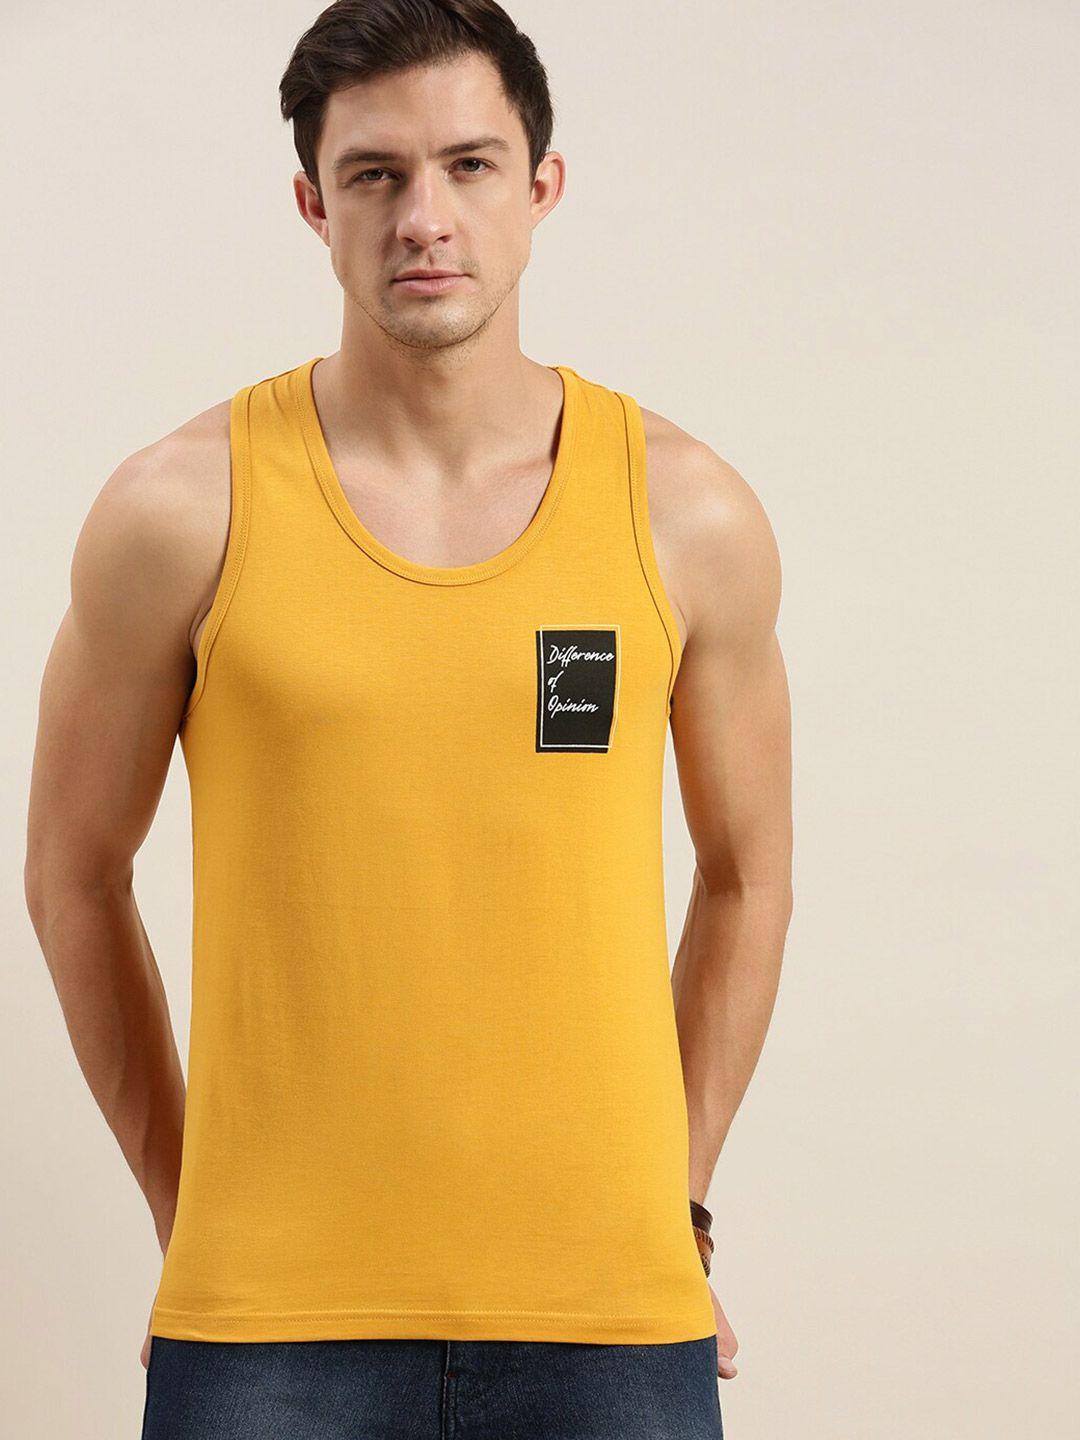 difference of opinion men mustard yellow pockets t-shirt